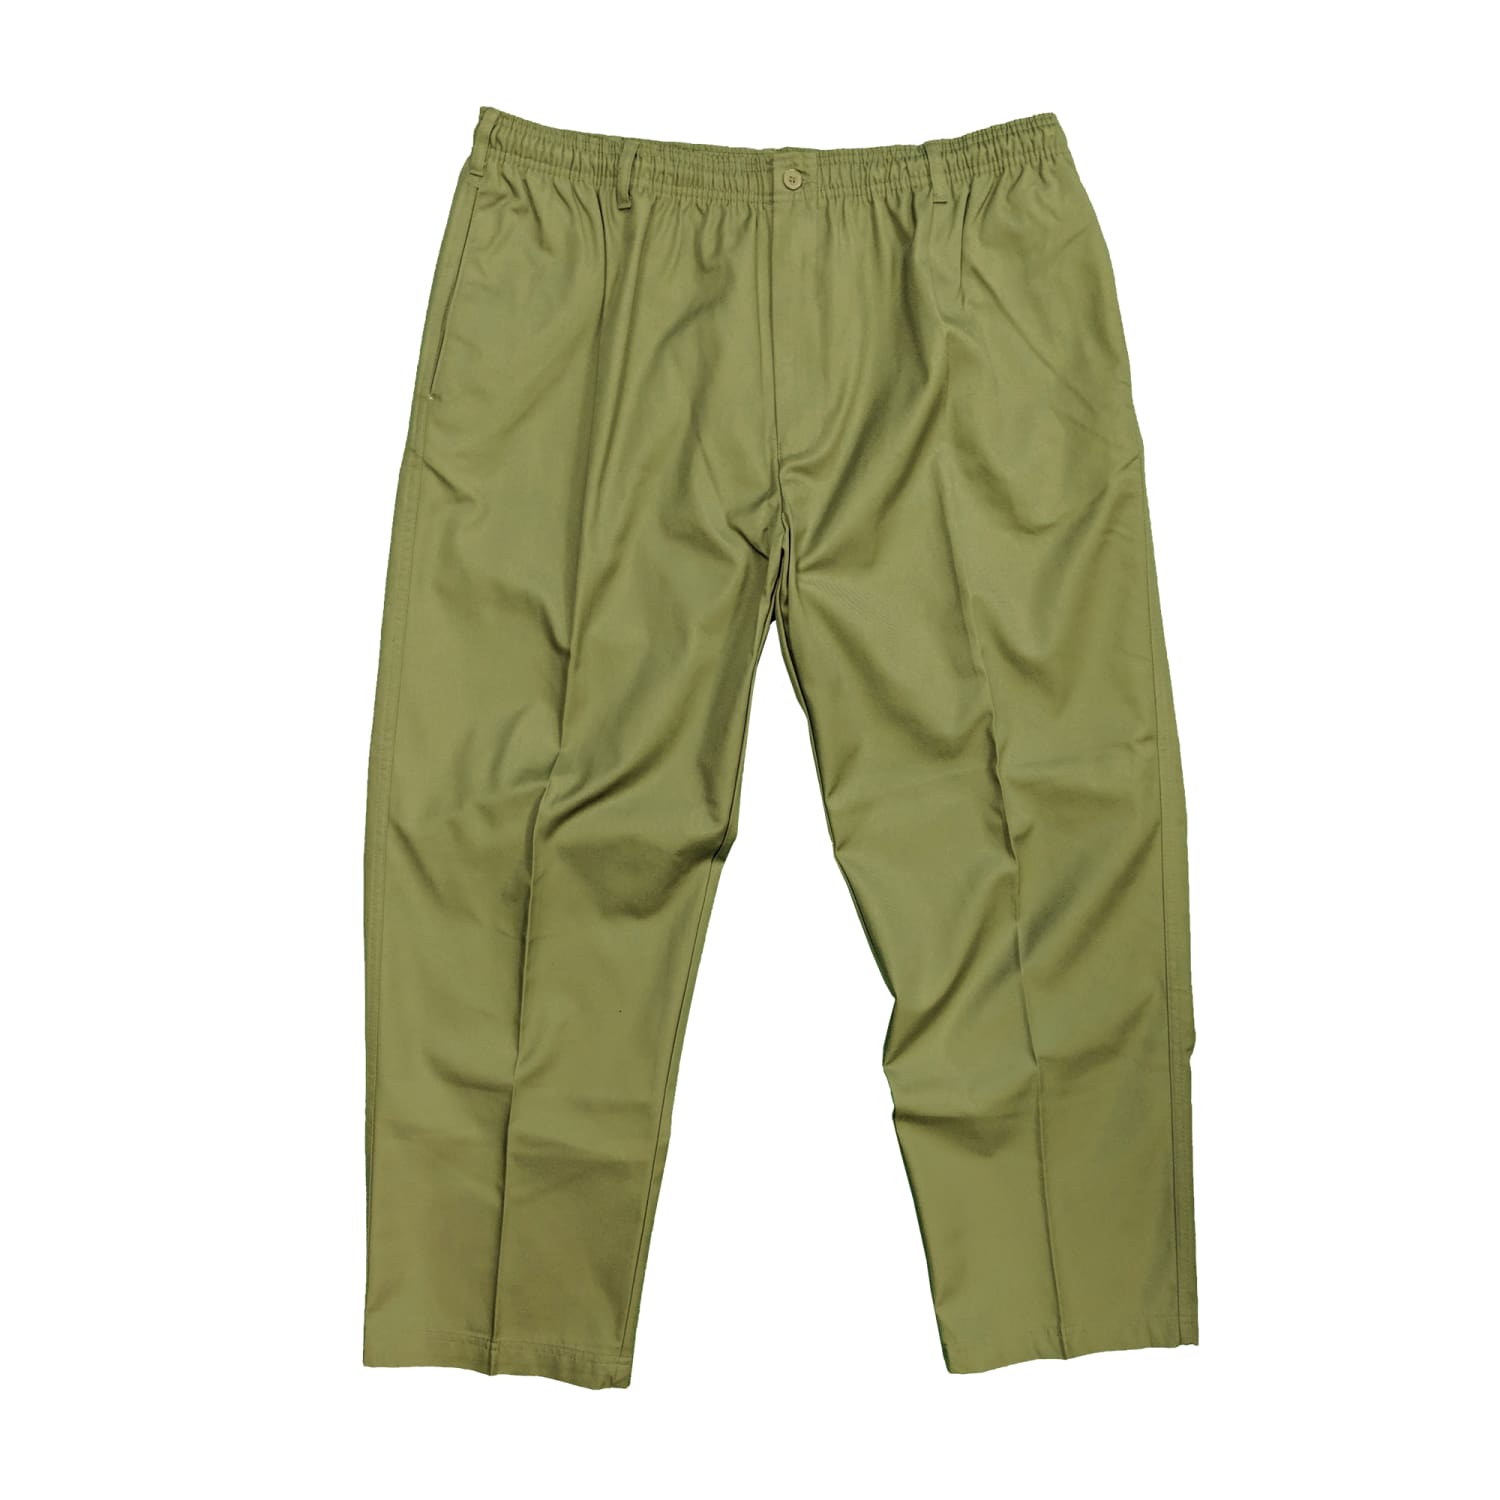 Cara Casuals Rugby Trousers - Khaki 1